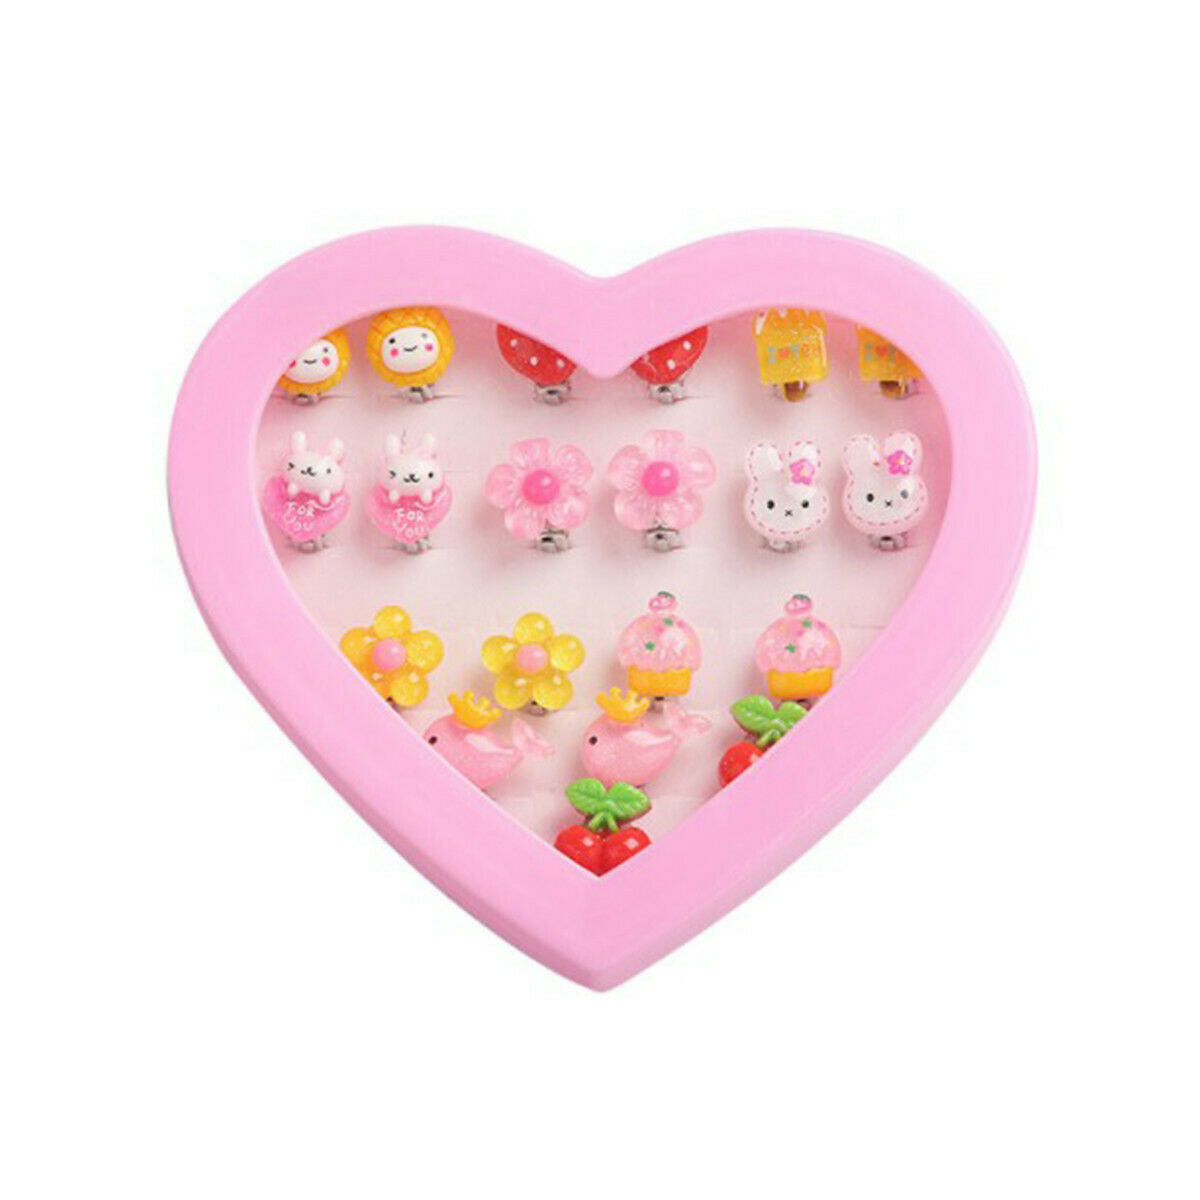 10Pair Cute Clip-On No Pierced Earrings For Kids Child Girls Christmas Xmas Gift